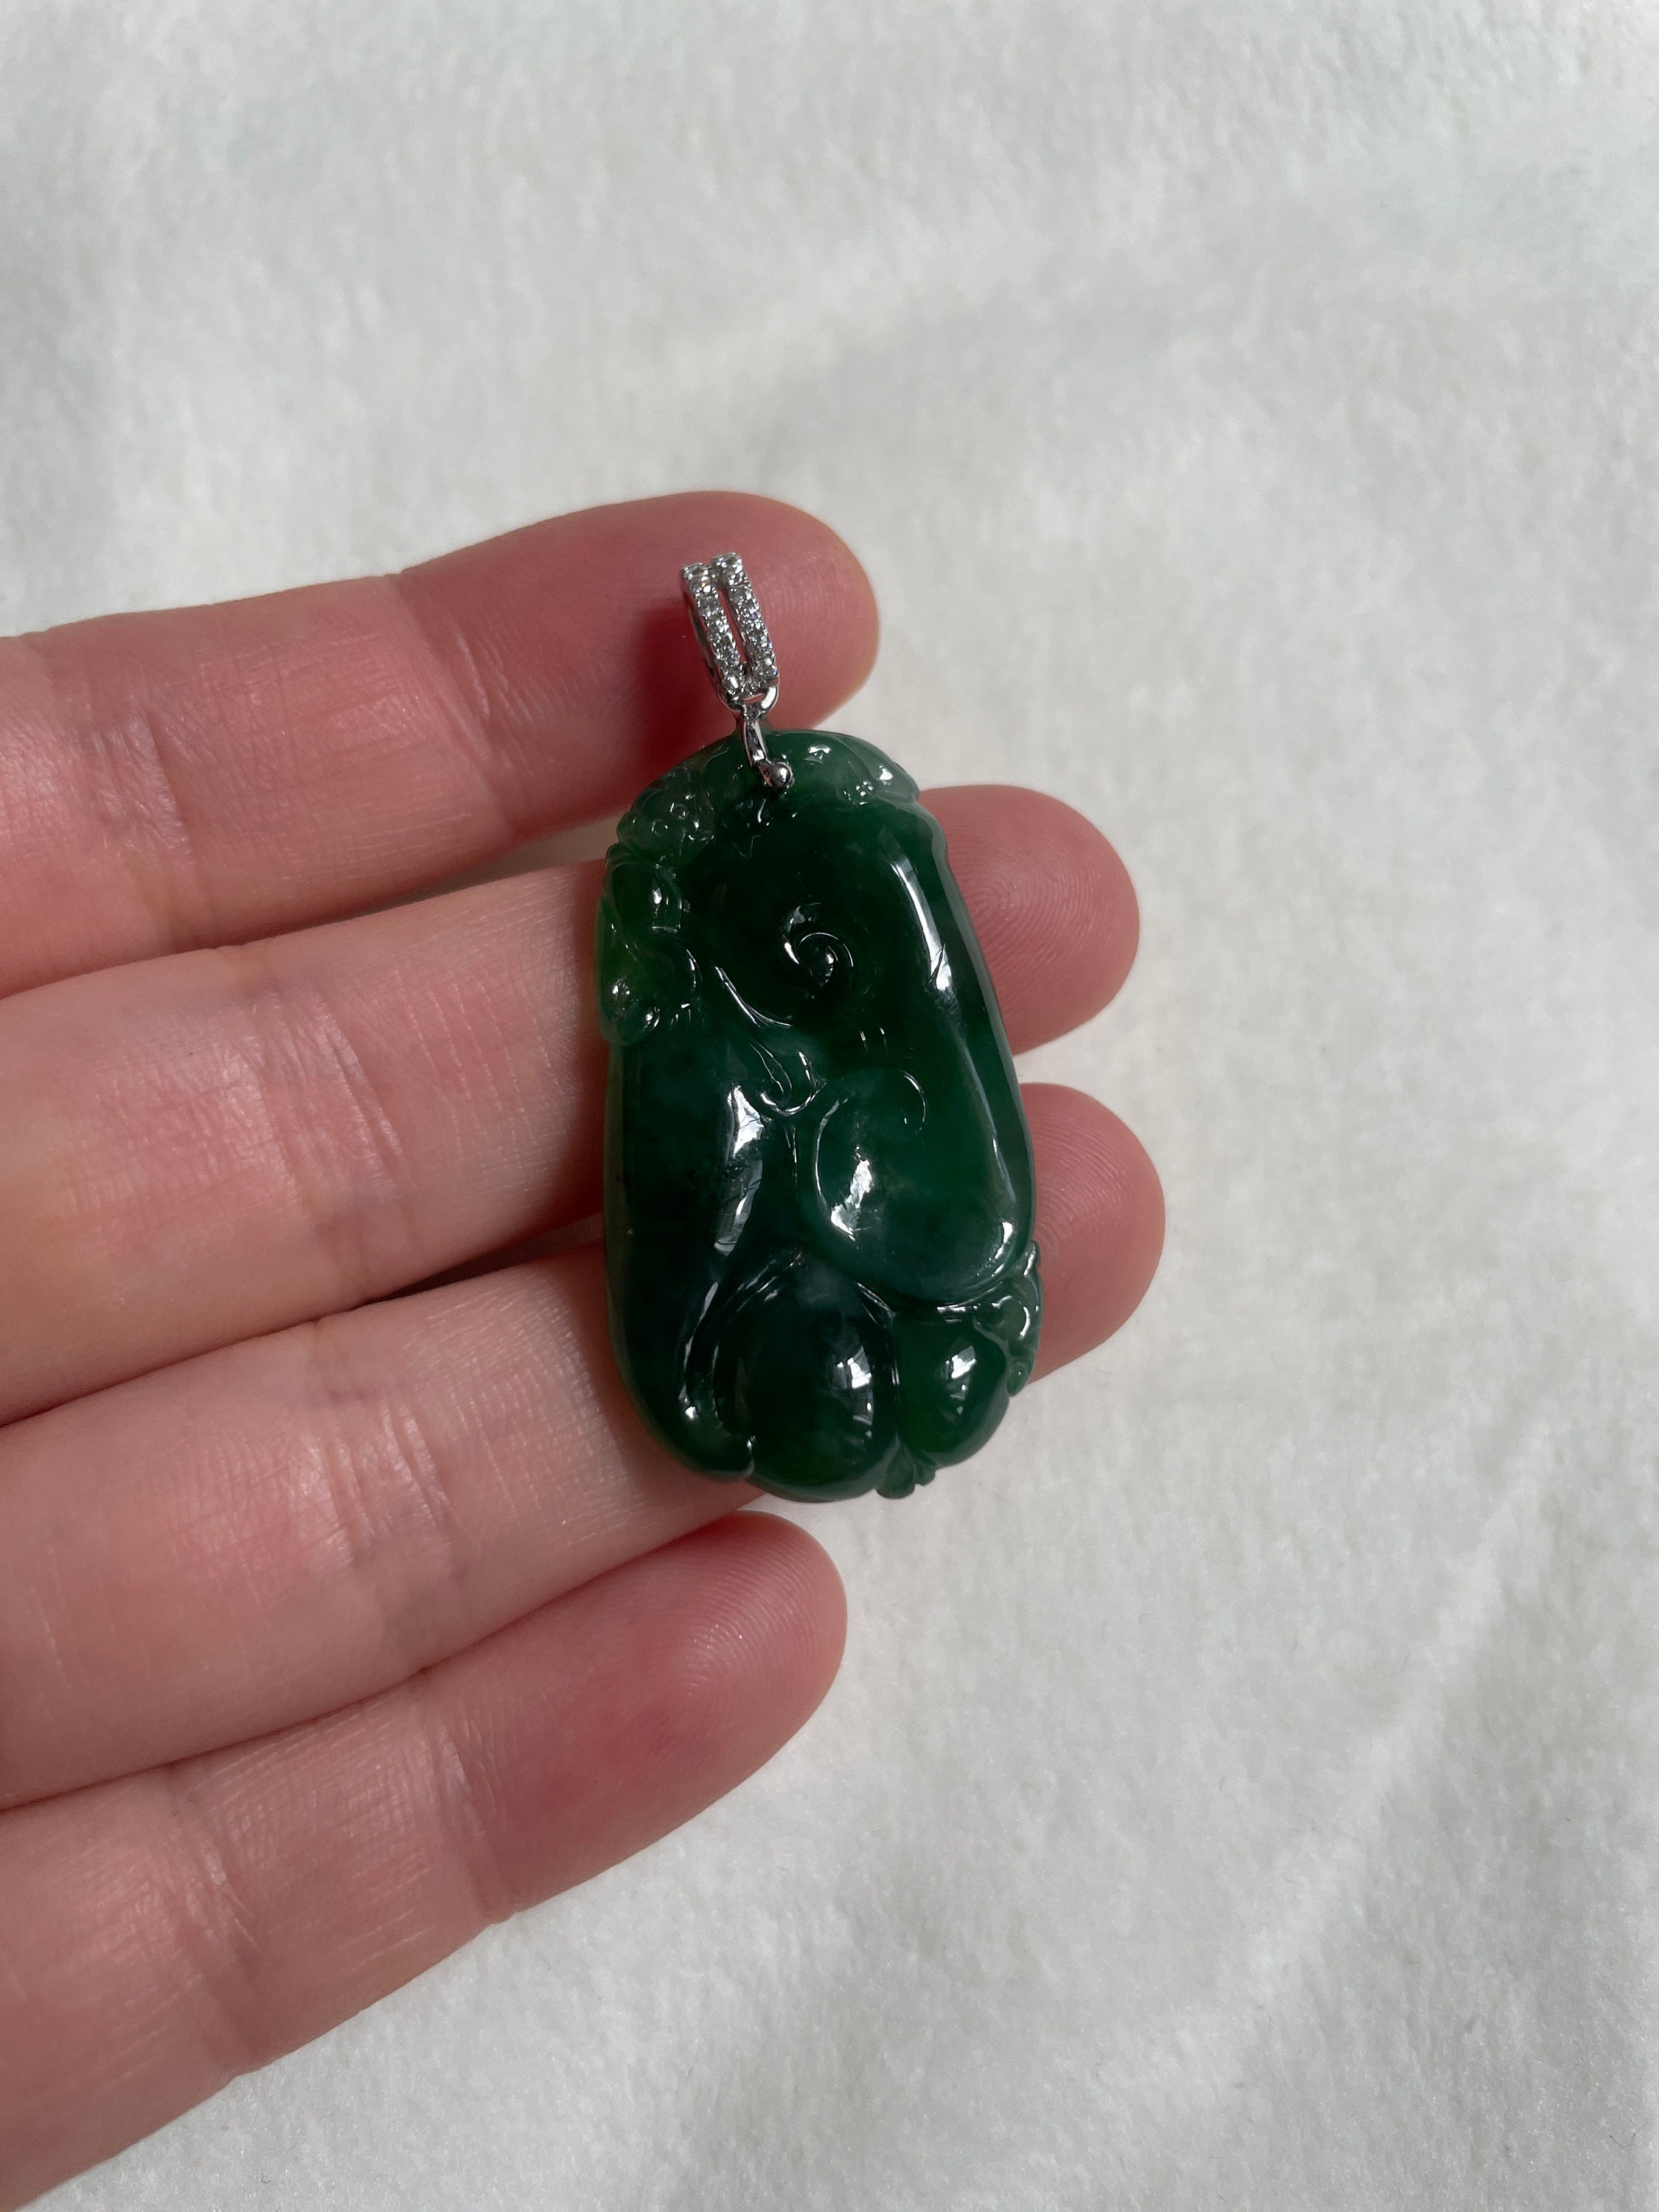 Details about   Natural Jadeite Jade Gemstone Happy Lucky Bean Pendant Jewelry--33mm*13mm 